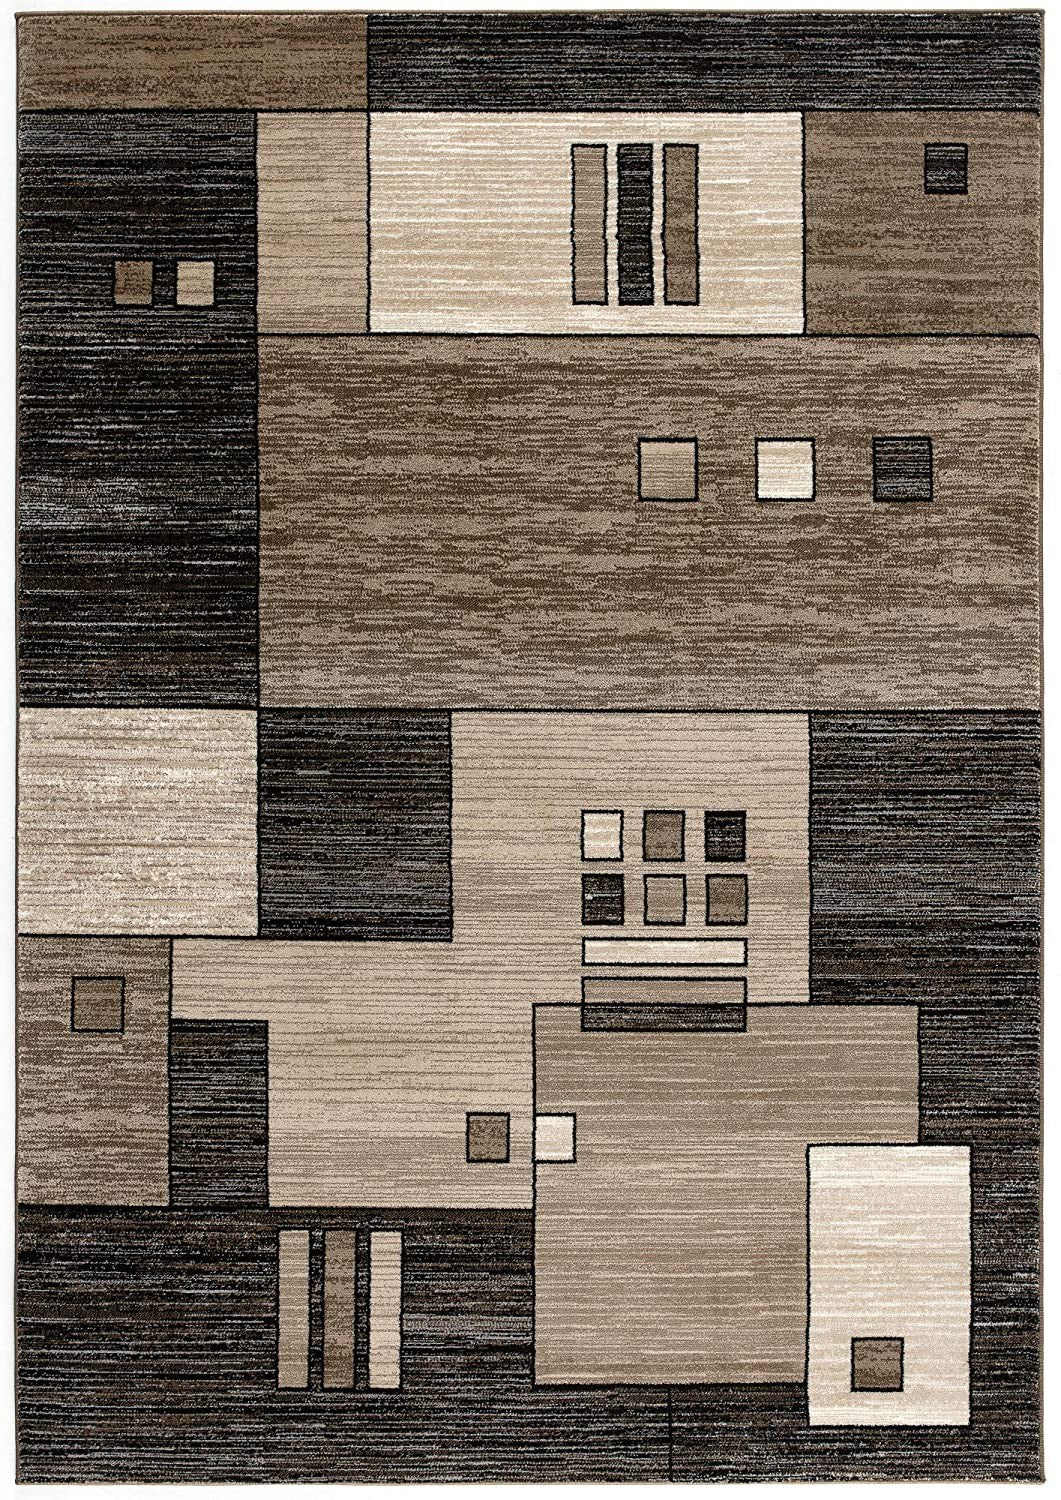 5' X 7' Beige Abstract Dhurrie Area Rug